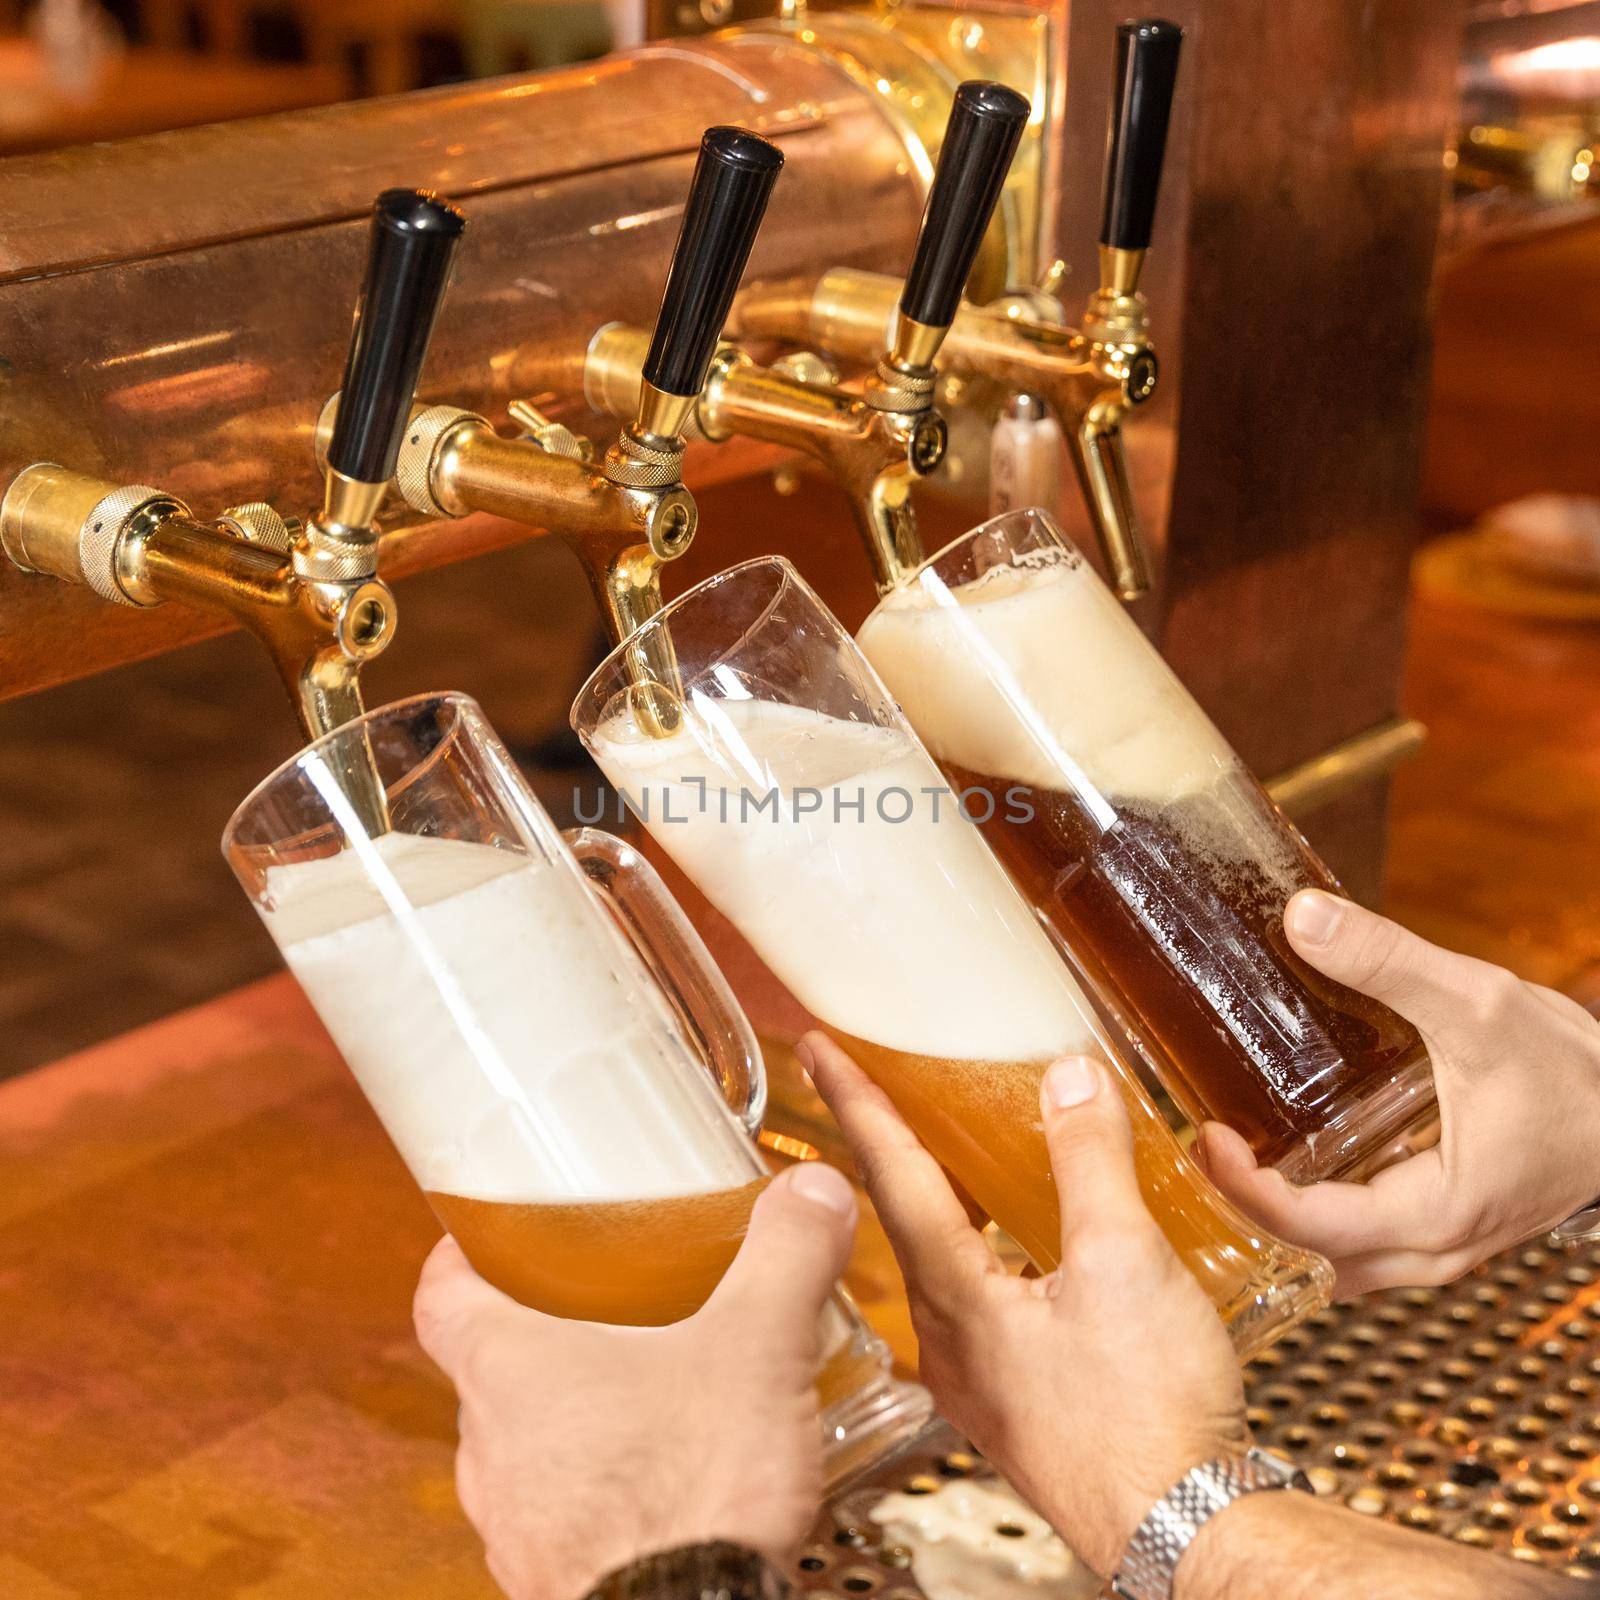 Pouring, filling beer glasses, mugs from barrel